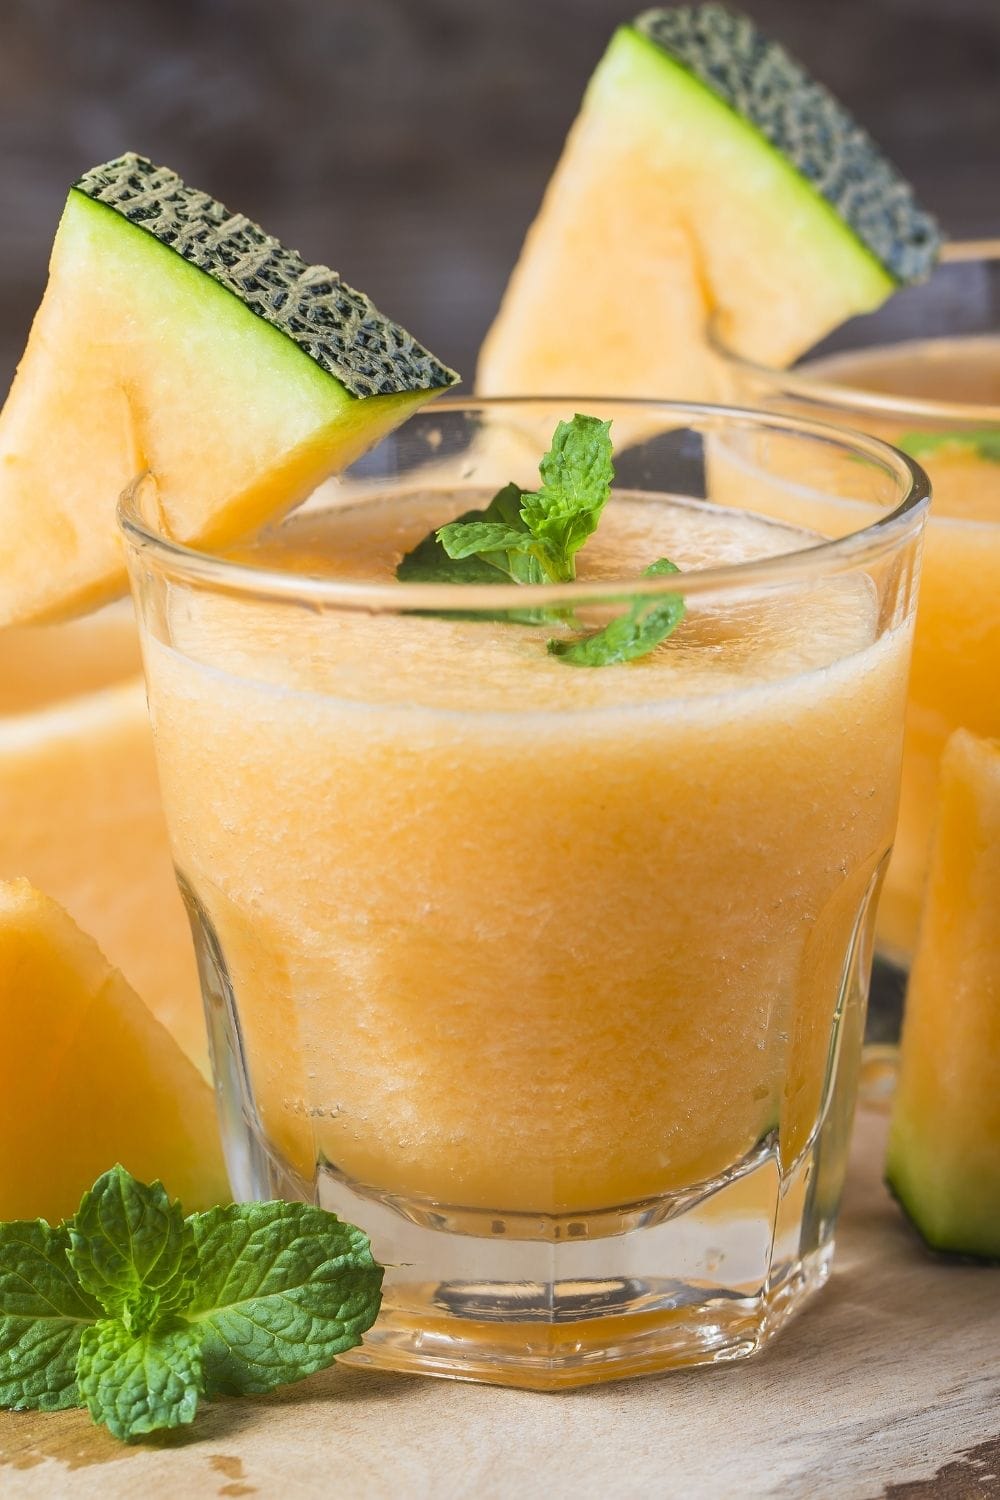 Cold Cantaloupe Juice in a Glass Jar